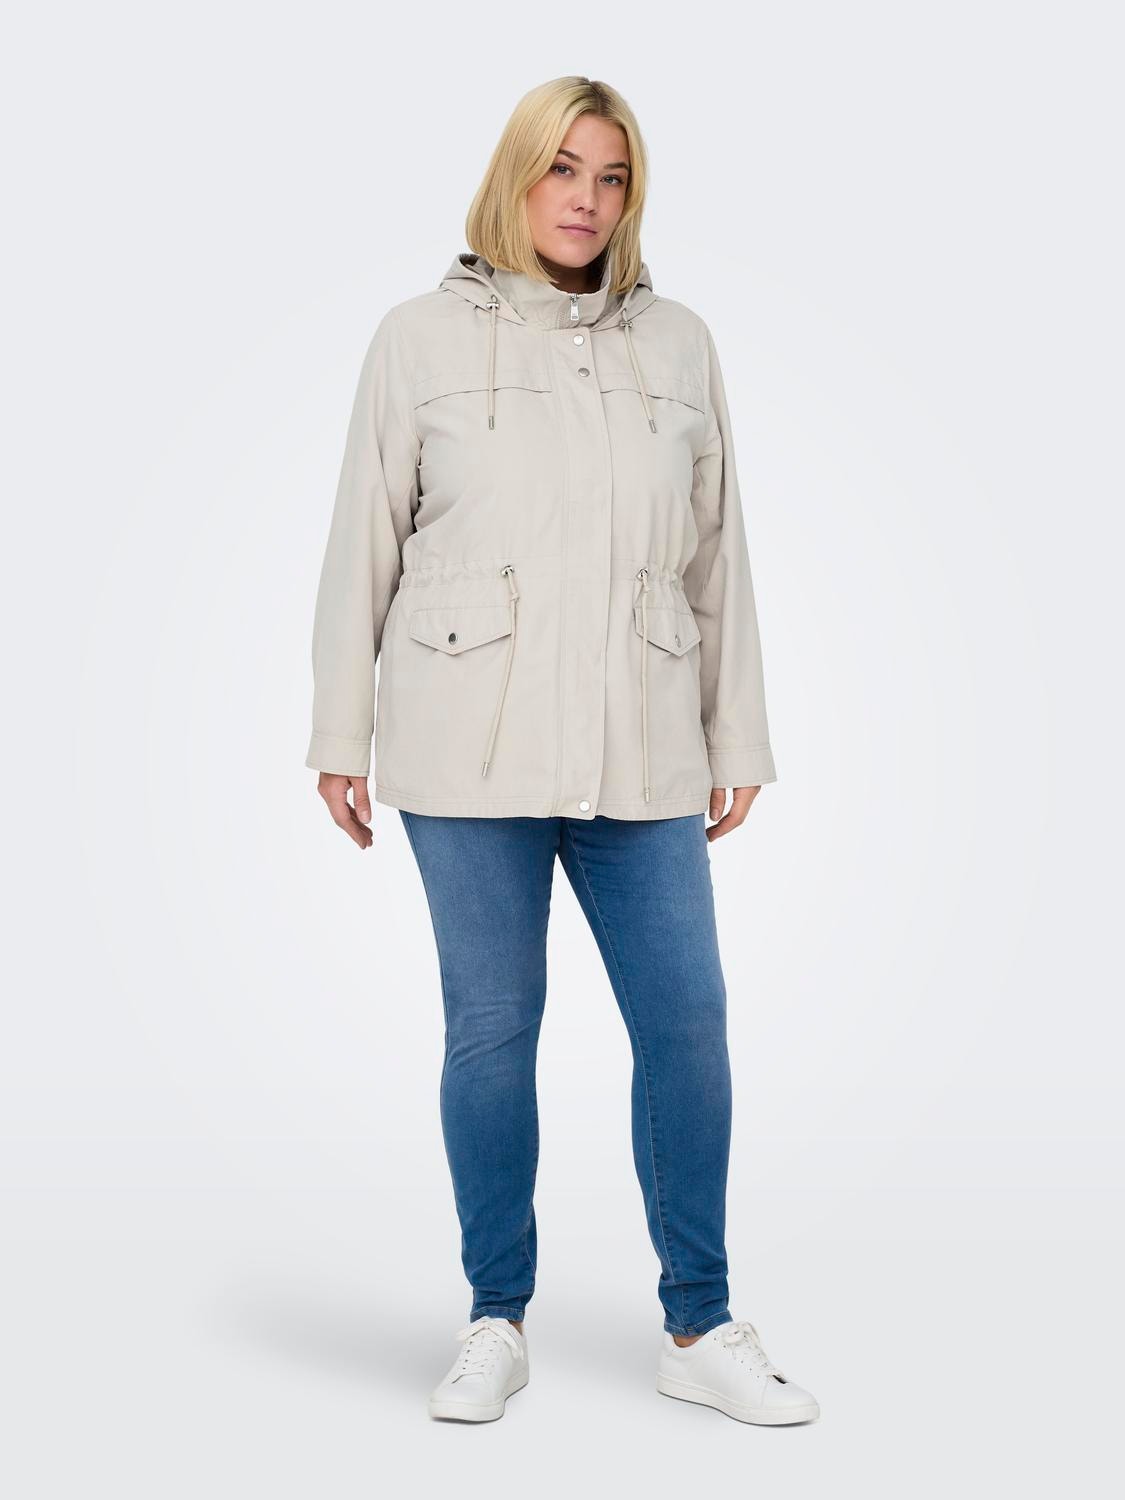 ONLY Curvy high neck jacket -Silver Lining - 15324874